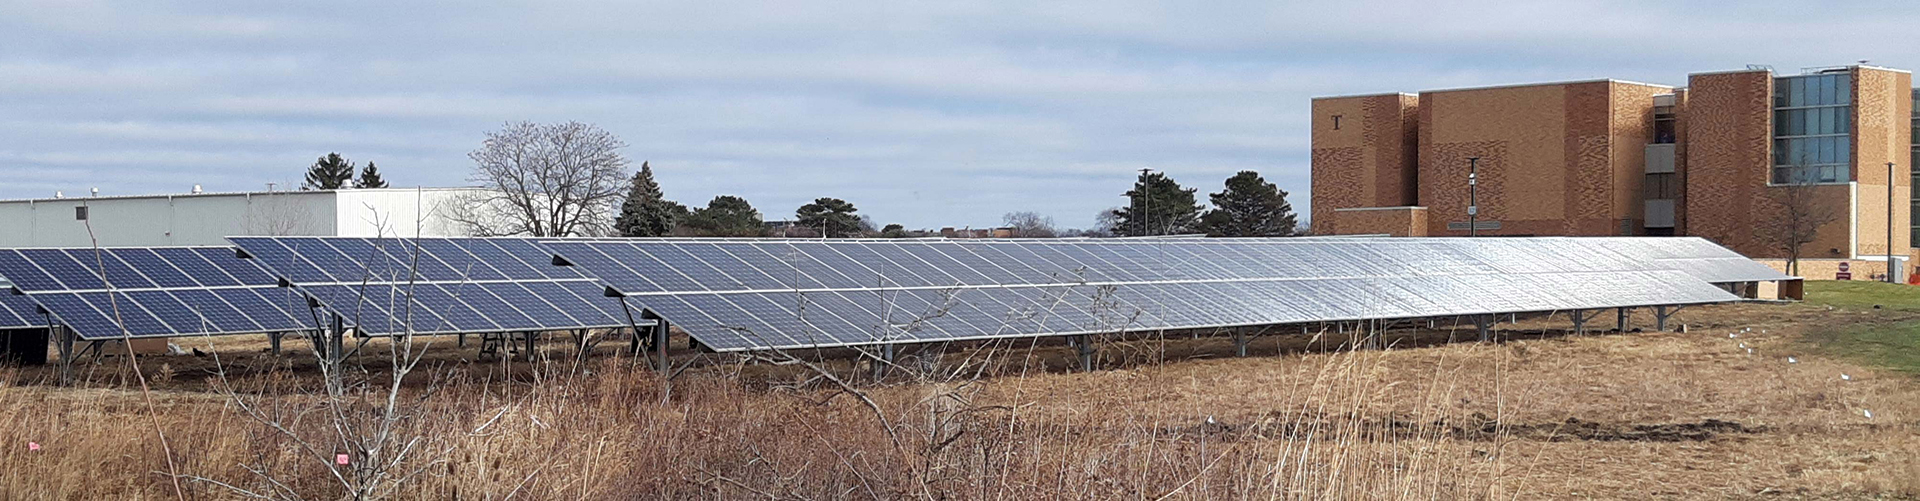 Solar Panel field at Grayslake Campus